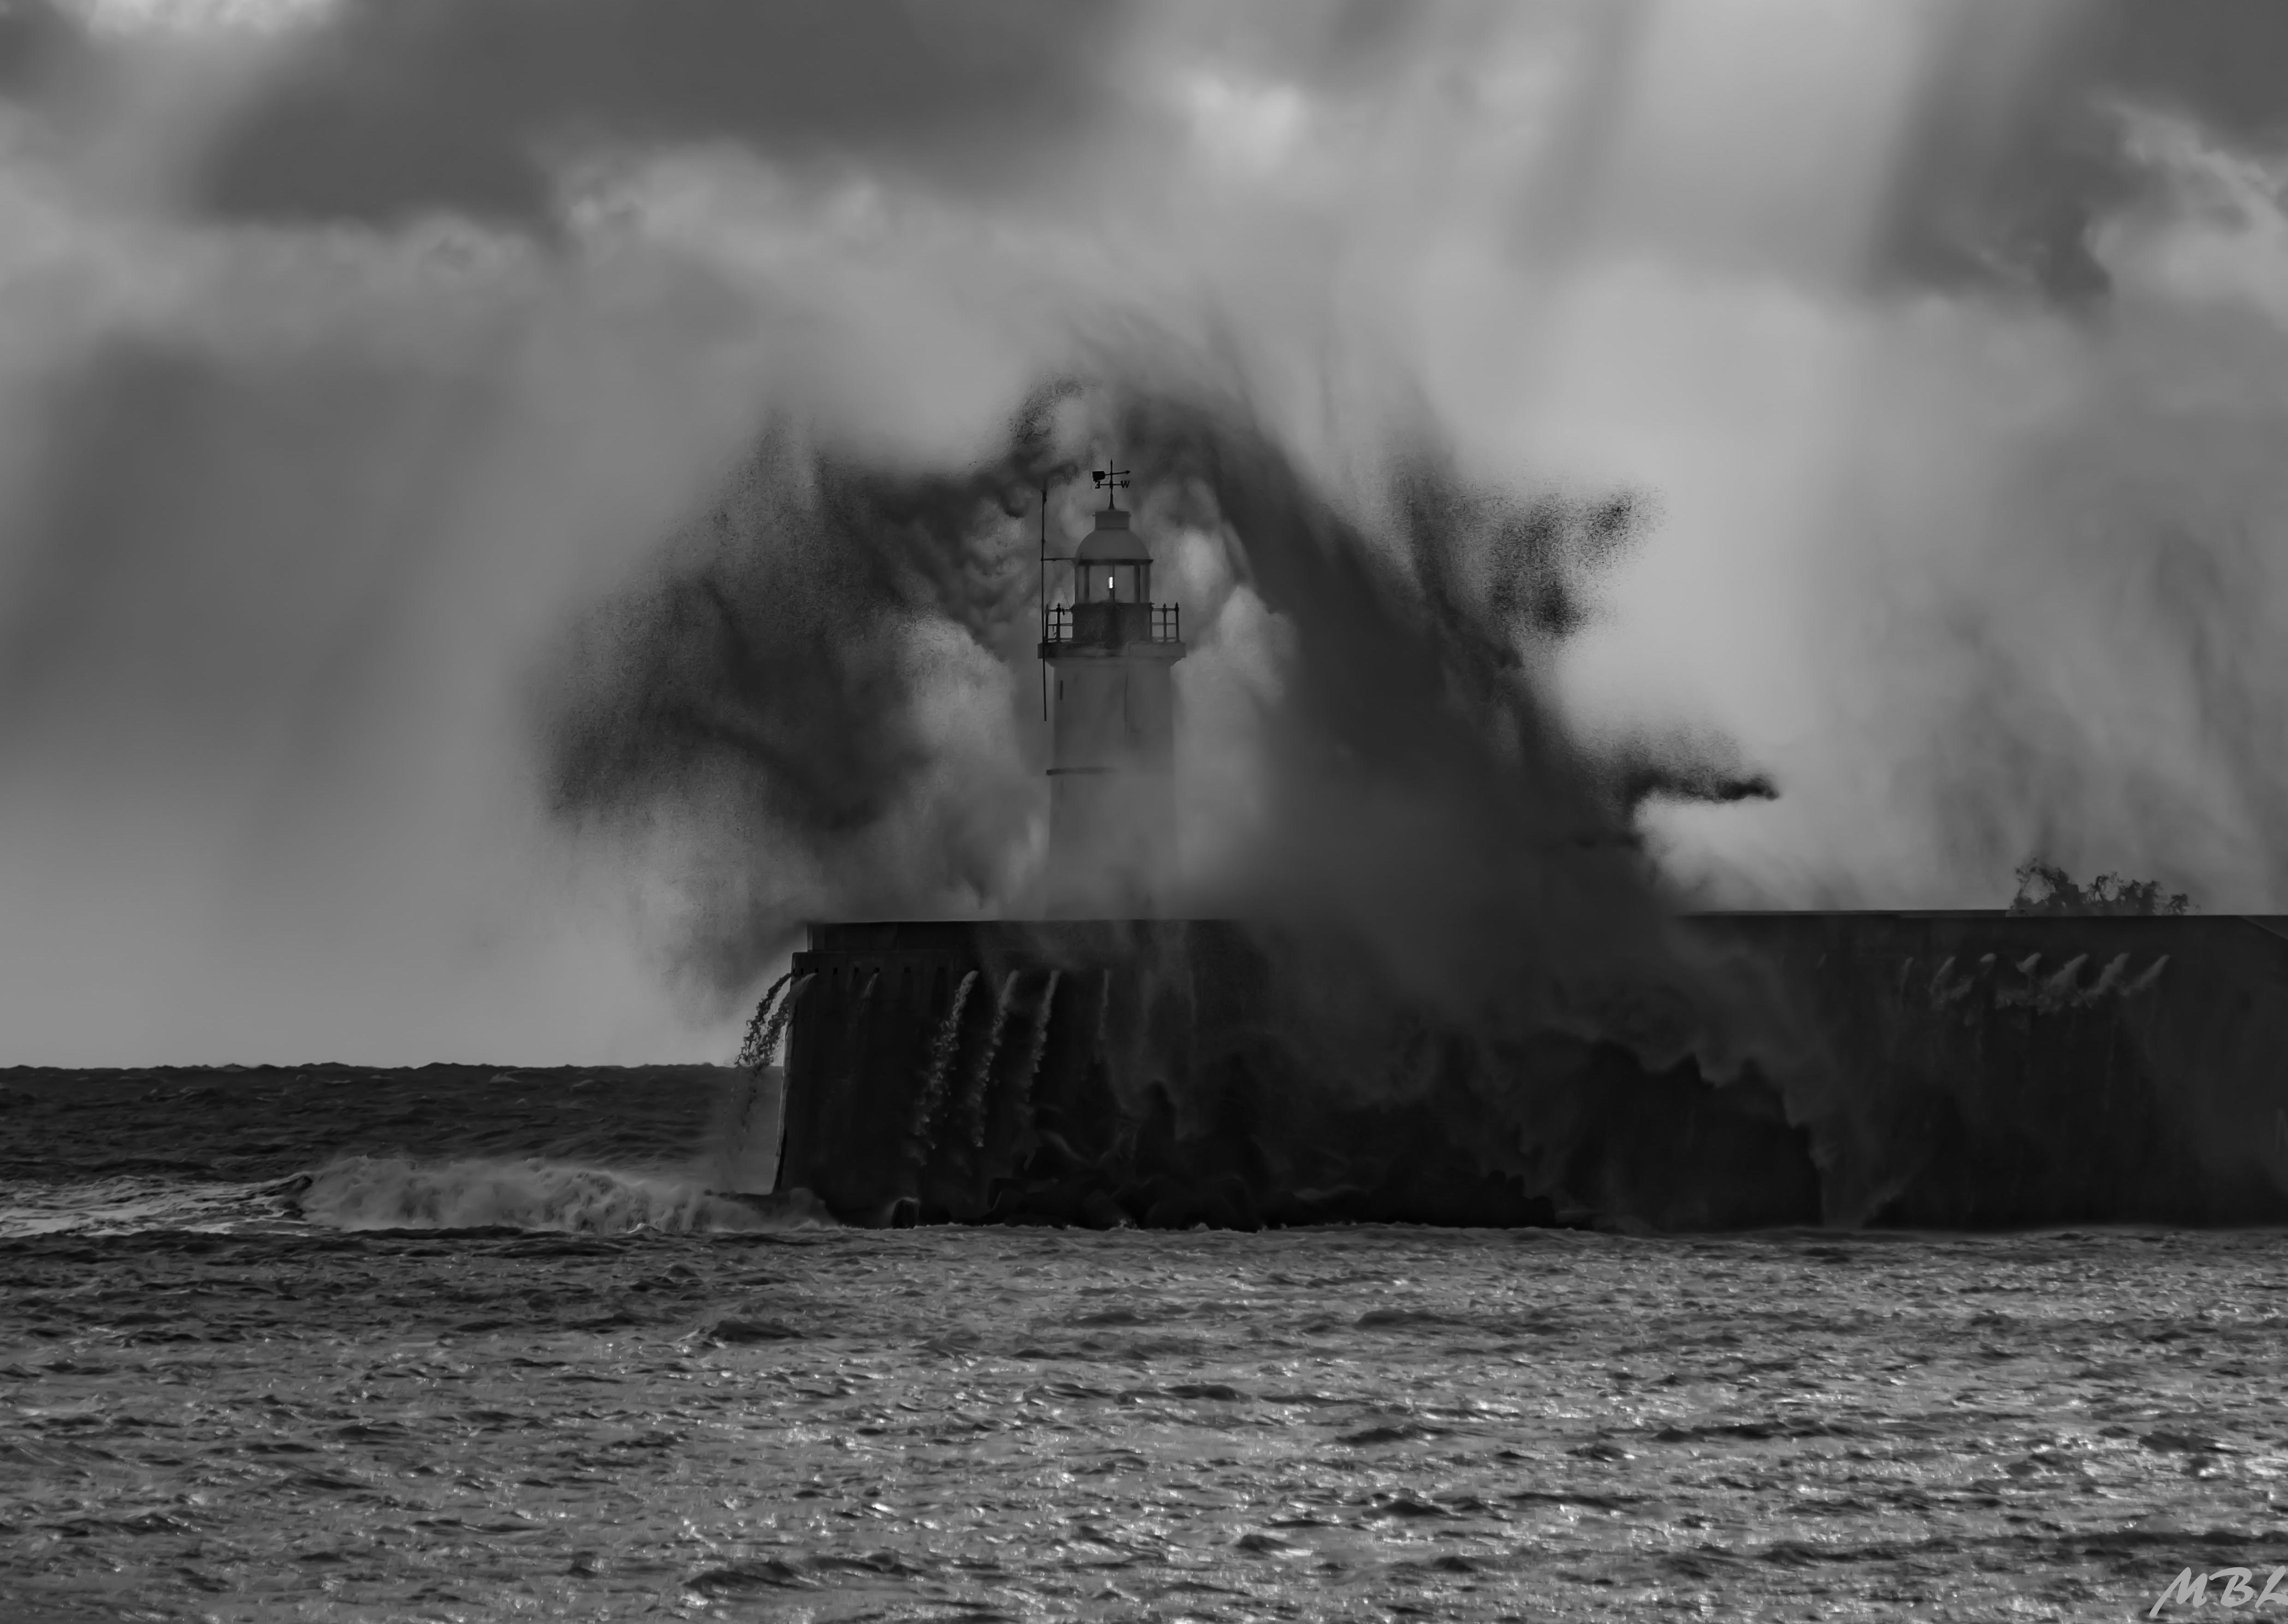 Newhaven Harbour arm in stormy weather by Marcus Berrisford. "Conditions were a bit challenging when I took this one. Driving rain, sea spray, a gale so strong I could hardly stand up and, despite all that, sunlight so bright it threatened to over expose the picture. Good fun though!" he said. SUS-200130-093652001